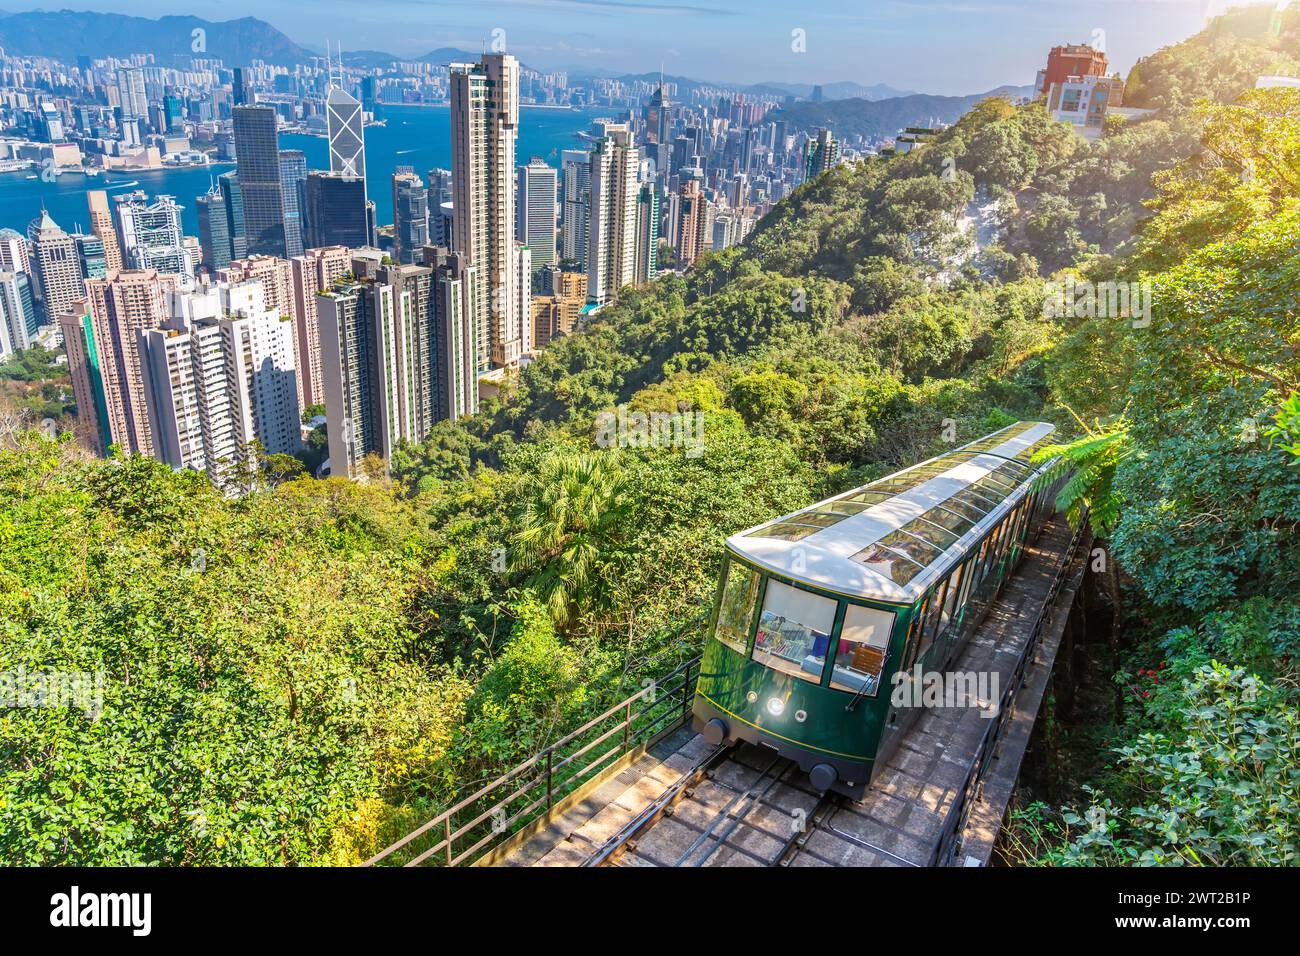 The famous green tram on the slope of Victoria Peak in Hong Kong passes, lifting visitors to the observation deck at the top. Stock Photo